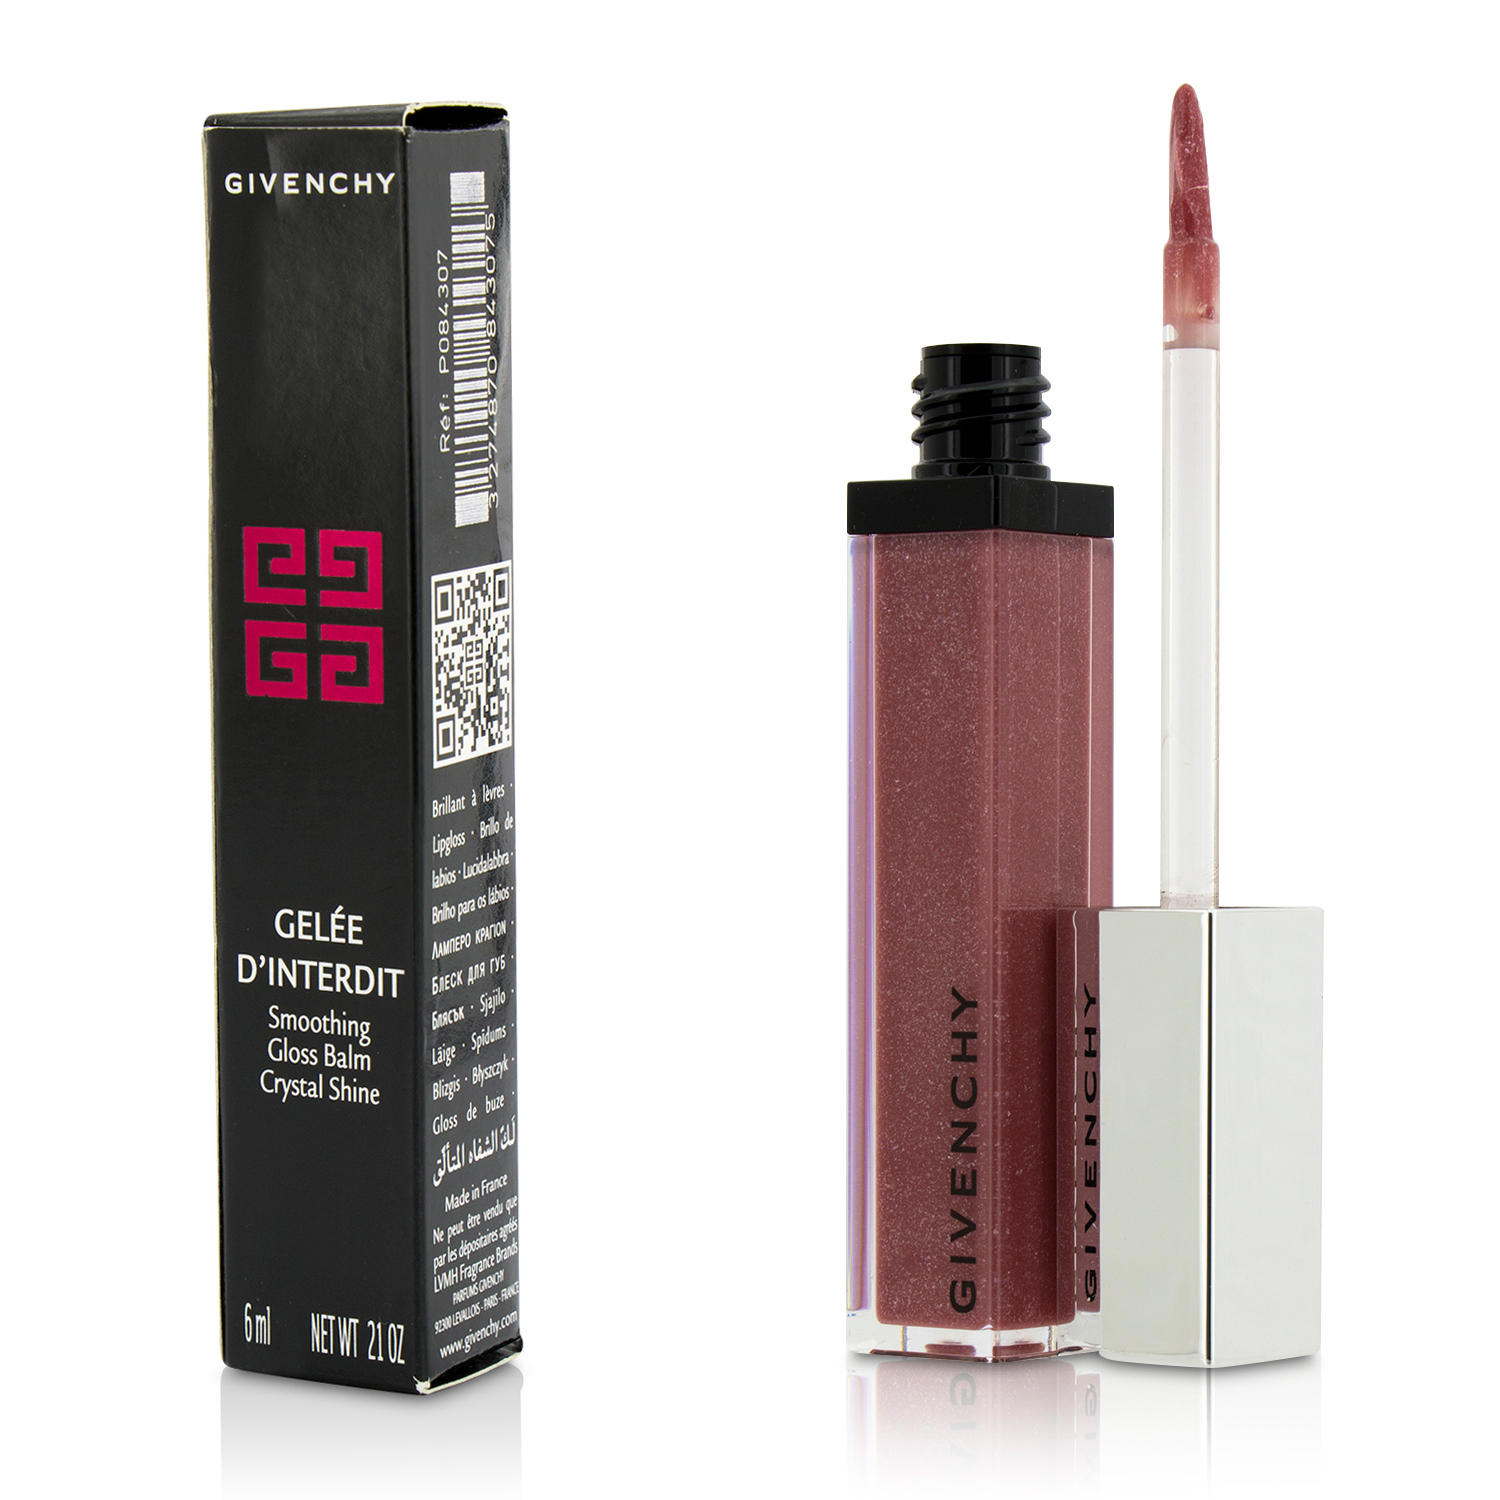 Gelee DInterdit Smoothing Gloss Balm Crystal Shine - # 7 Blooming Pink Givenchy Image